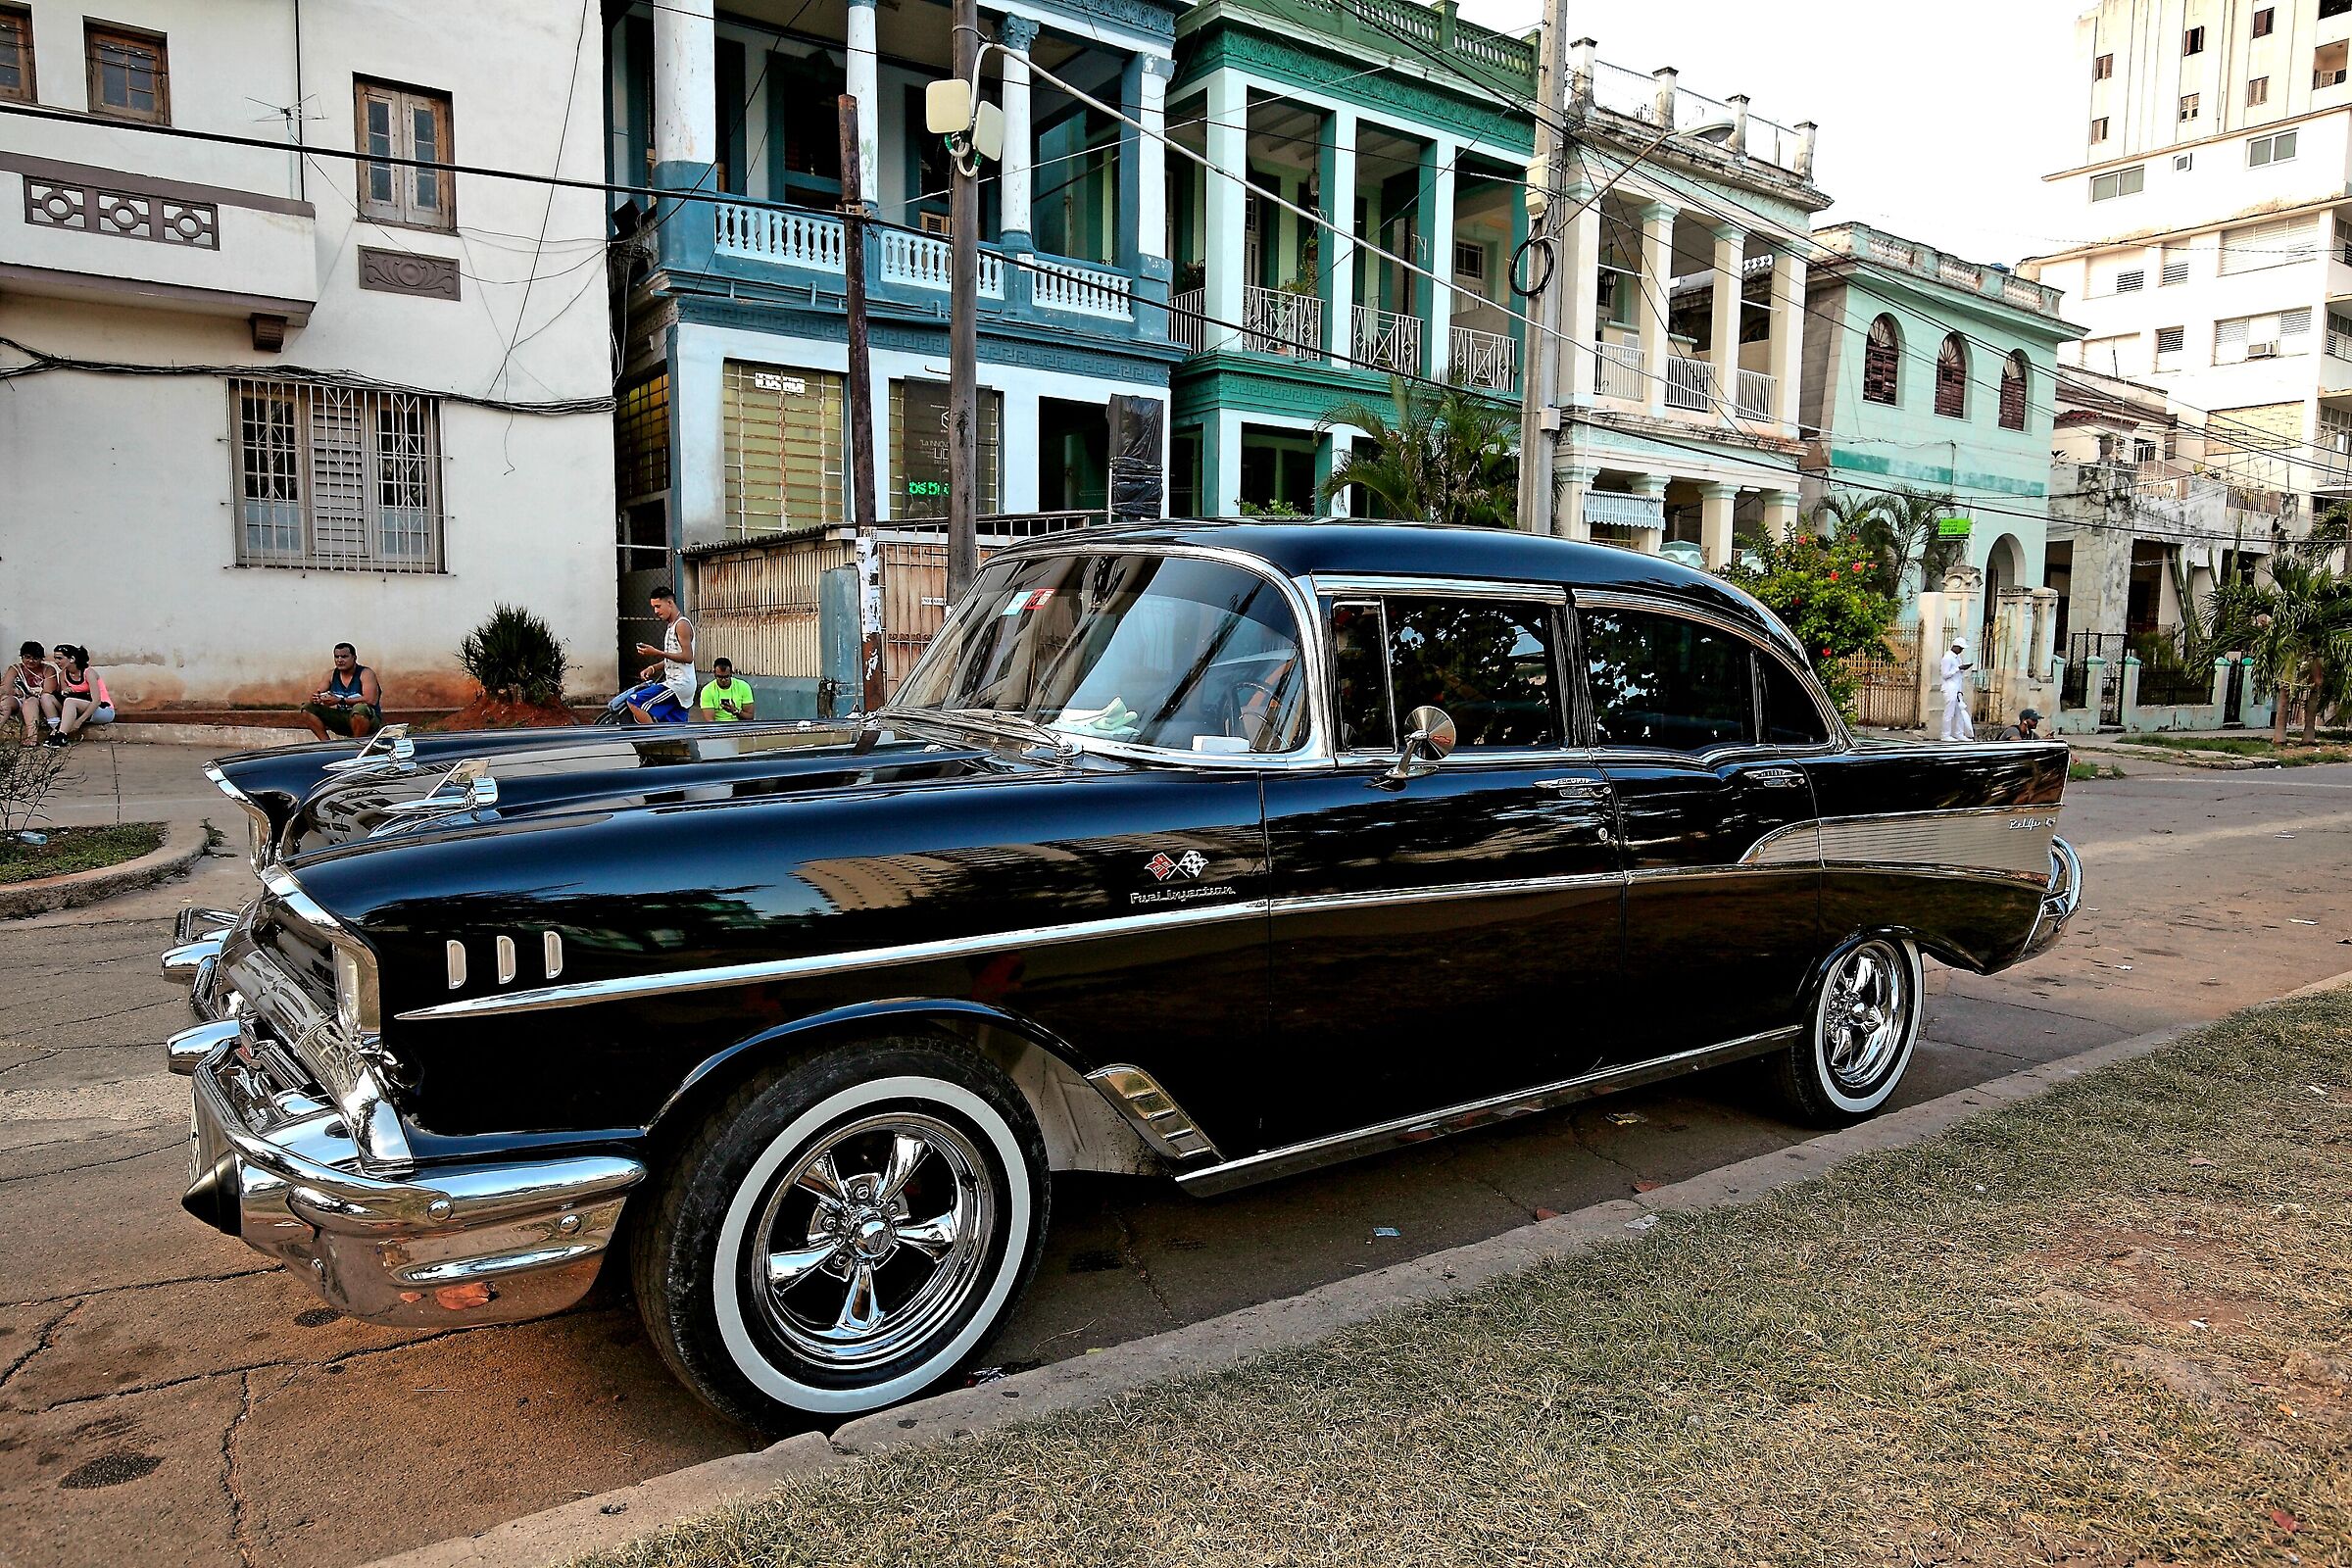 The "Black Chevy of the boss" Bel-Air Fuel Injected '57...